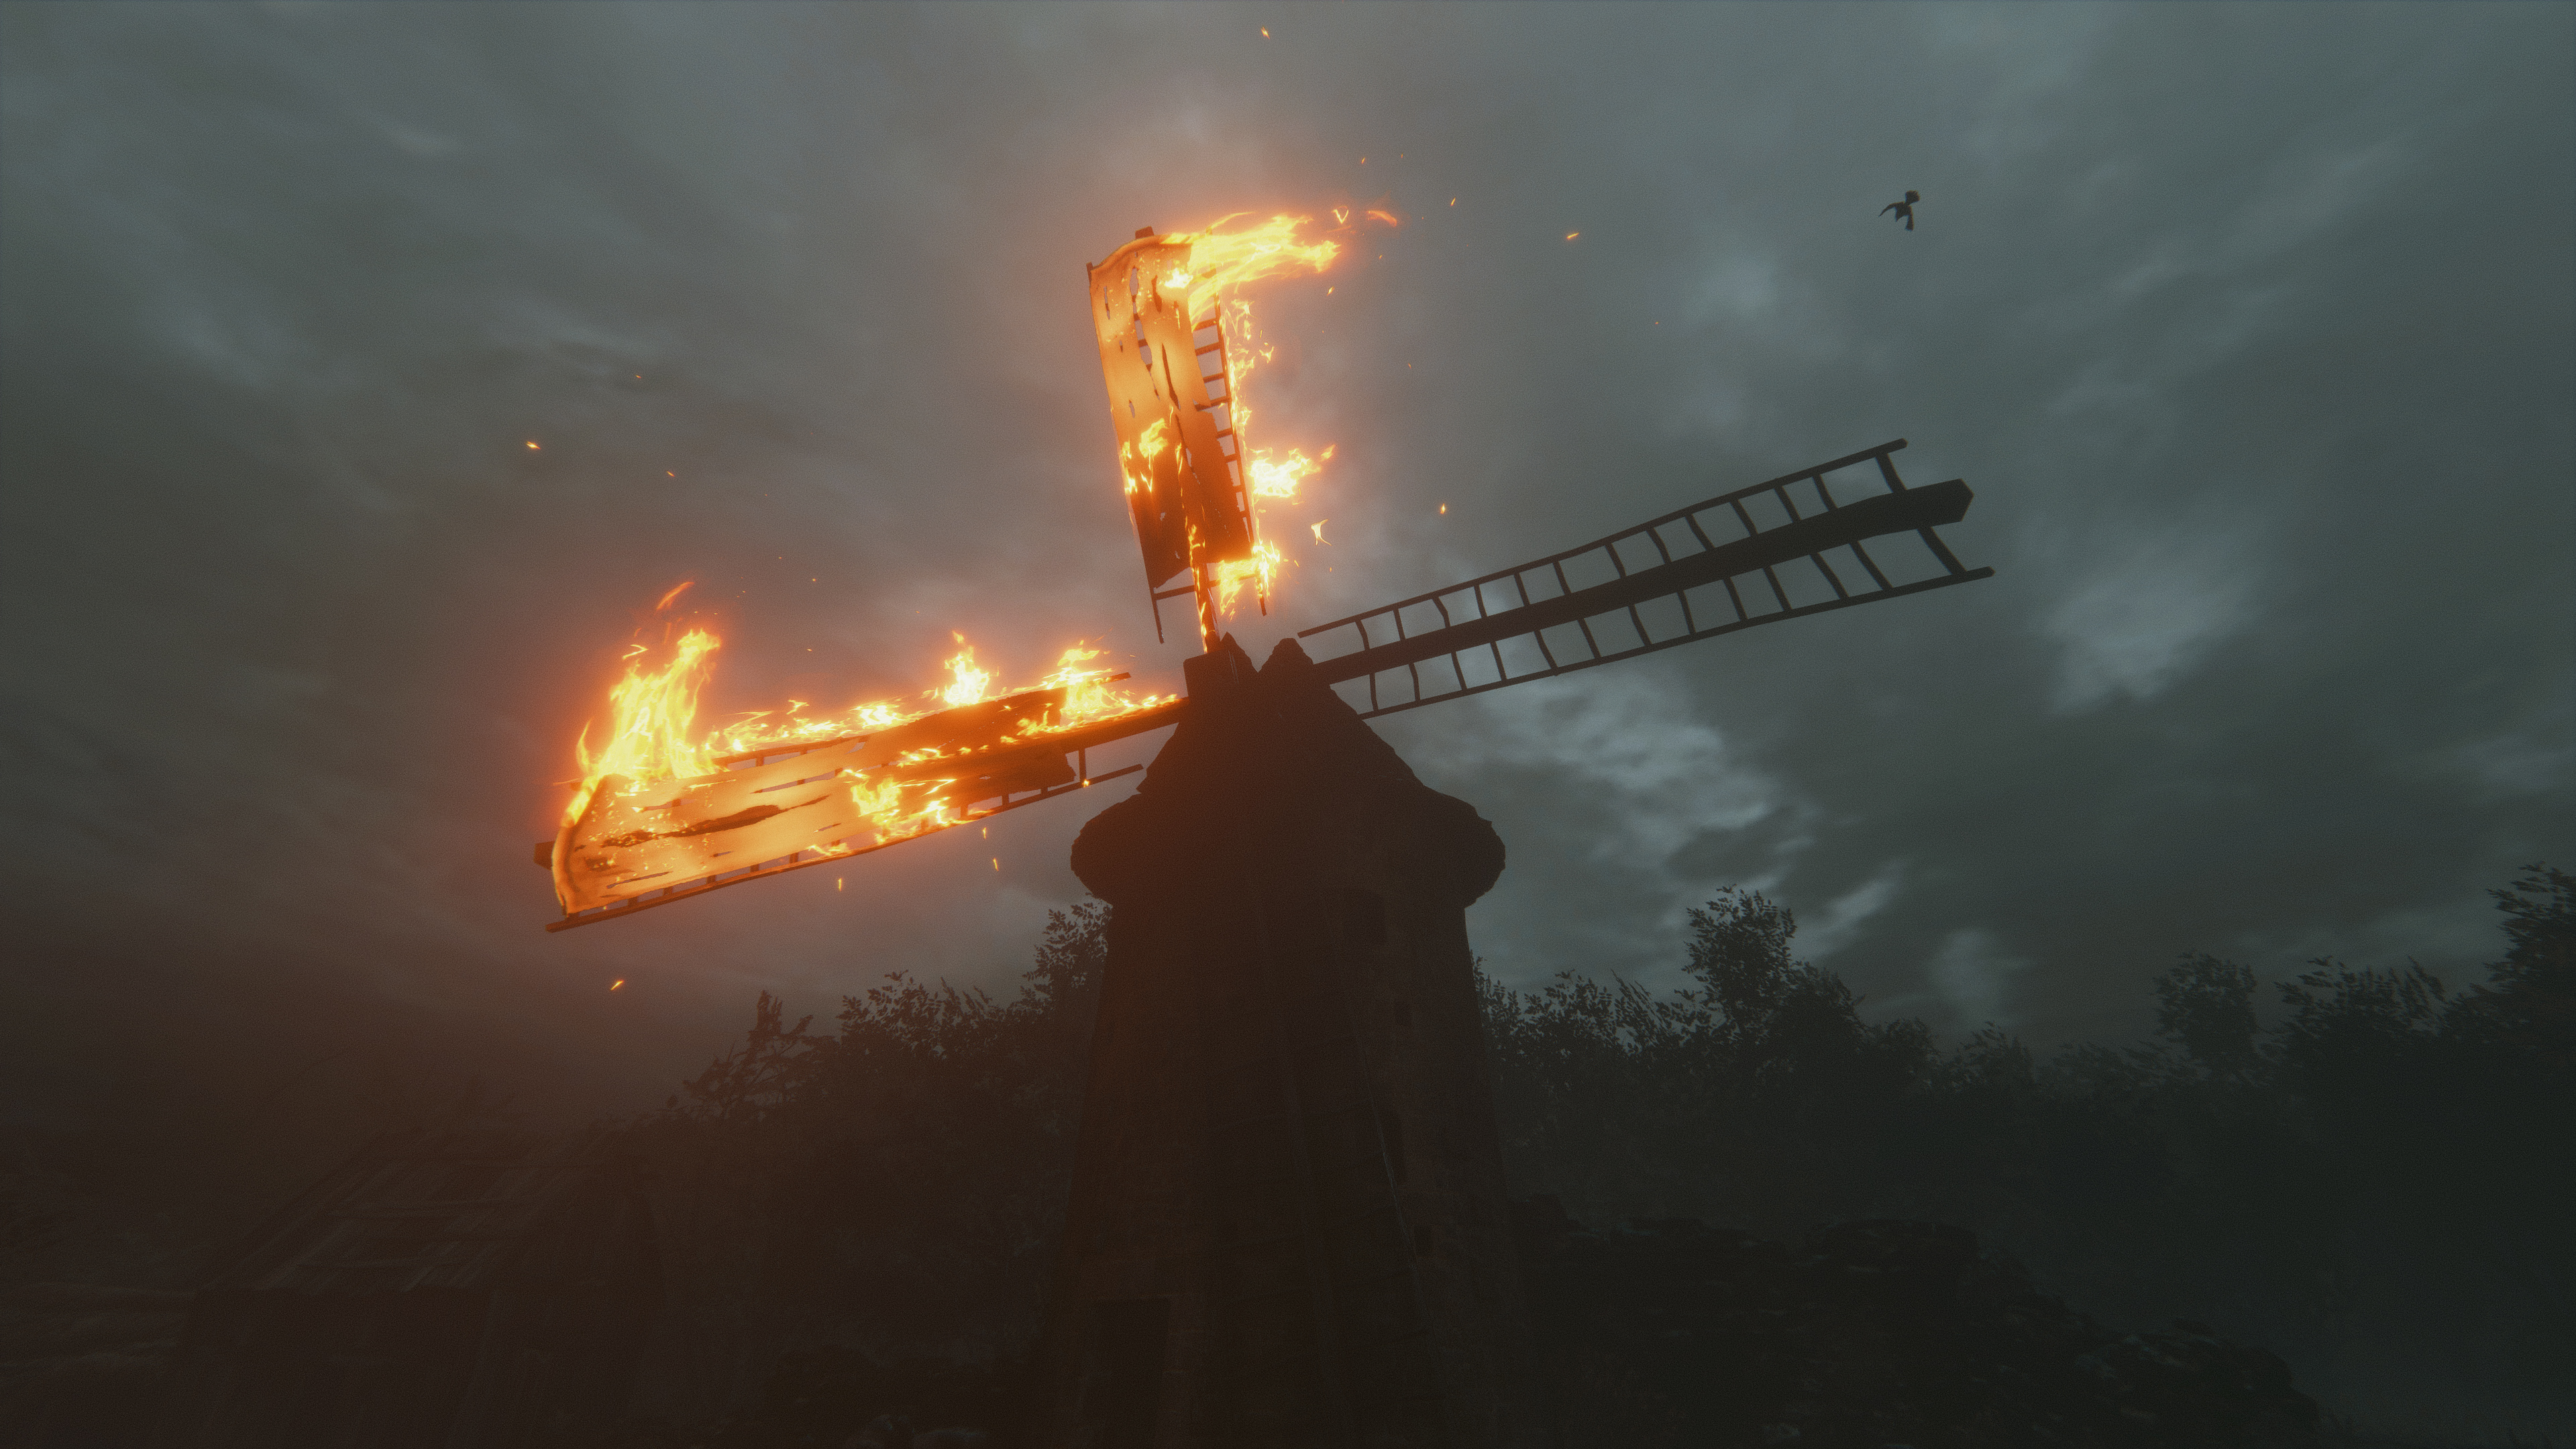 General 3840x2160 windmill A Plague Tale Innocence burning screen shot Asobo Studio video games video game landscape